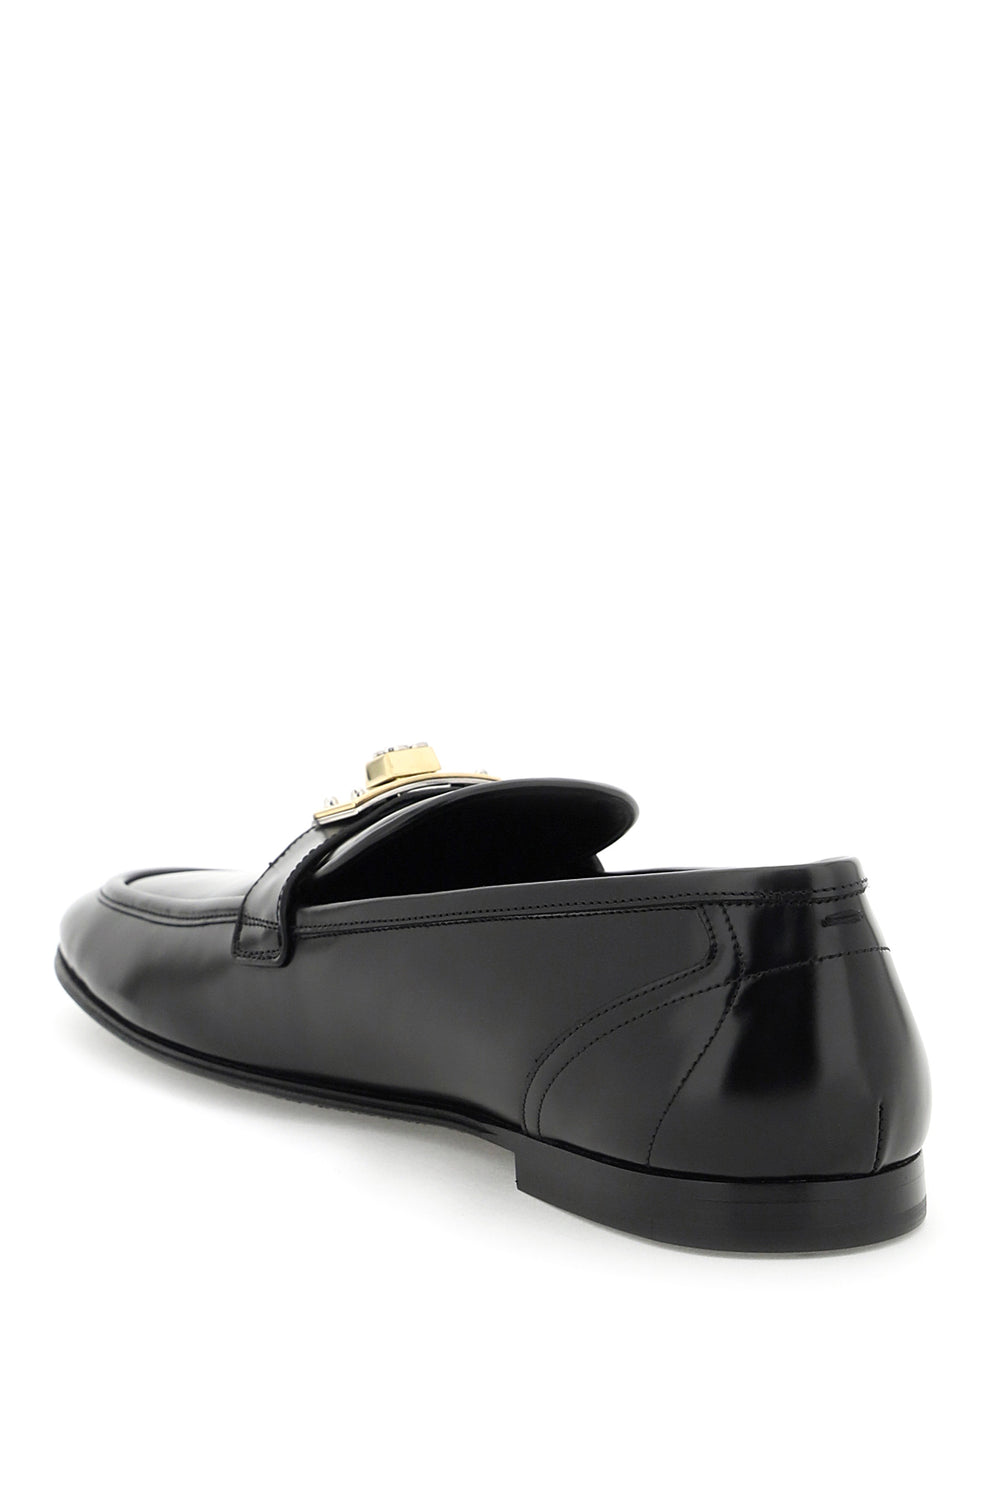 leather loafers-1